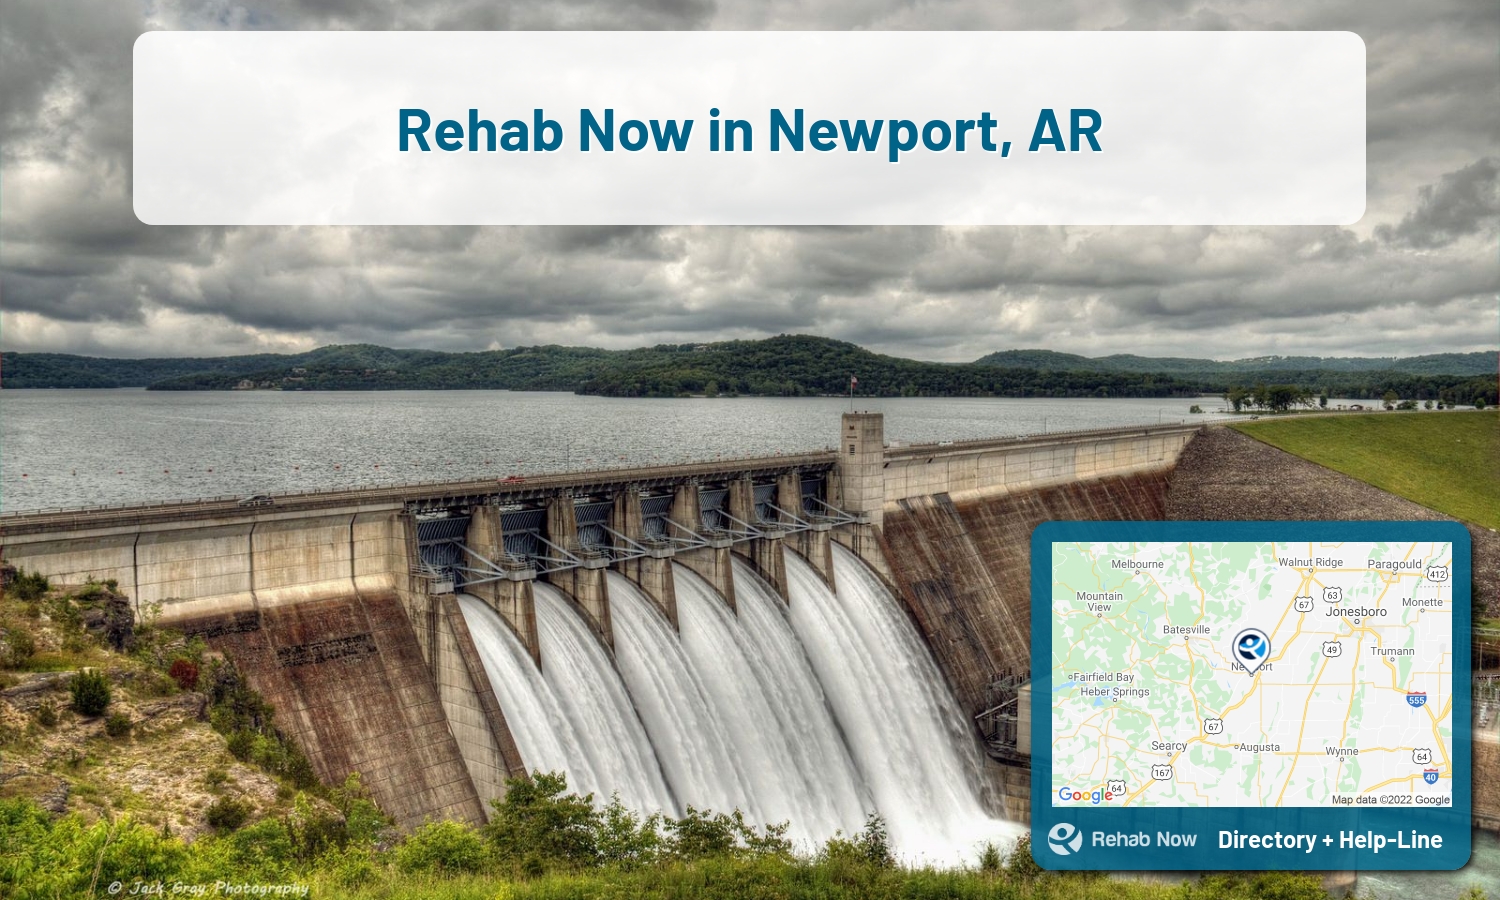 Our experts can help you find treatment now in Newport, Arkansas. We list drug rehab and alcohol centers in Arkansas.